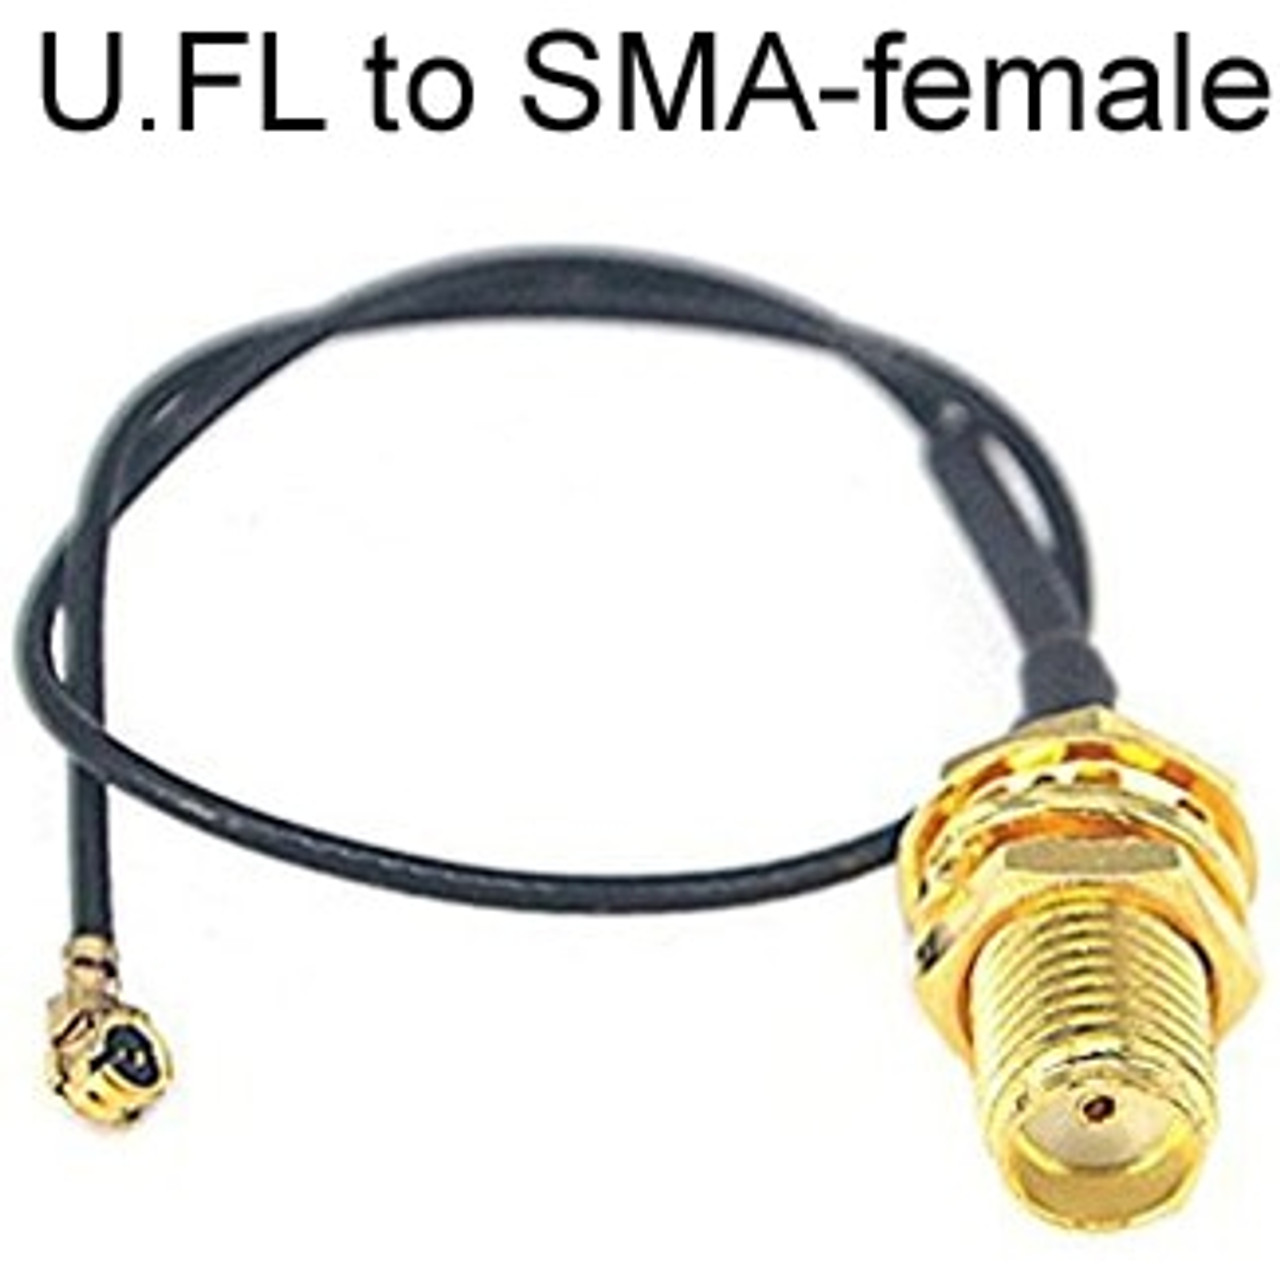 TLS.eagle SMA Connector Kit in Adapter Standard SMA Male/Female to N Female/Male RF Coax Antenna Cable Connector Converter Pack of 8 